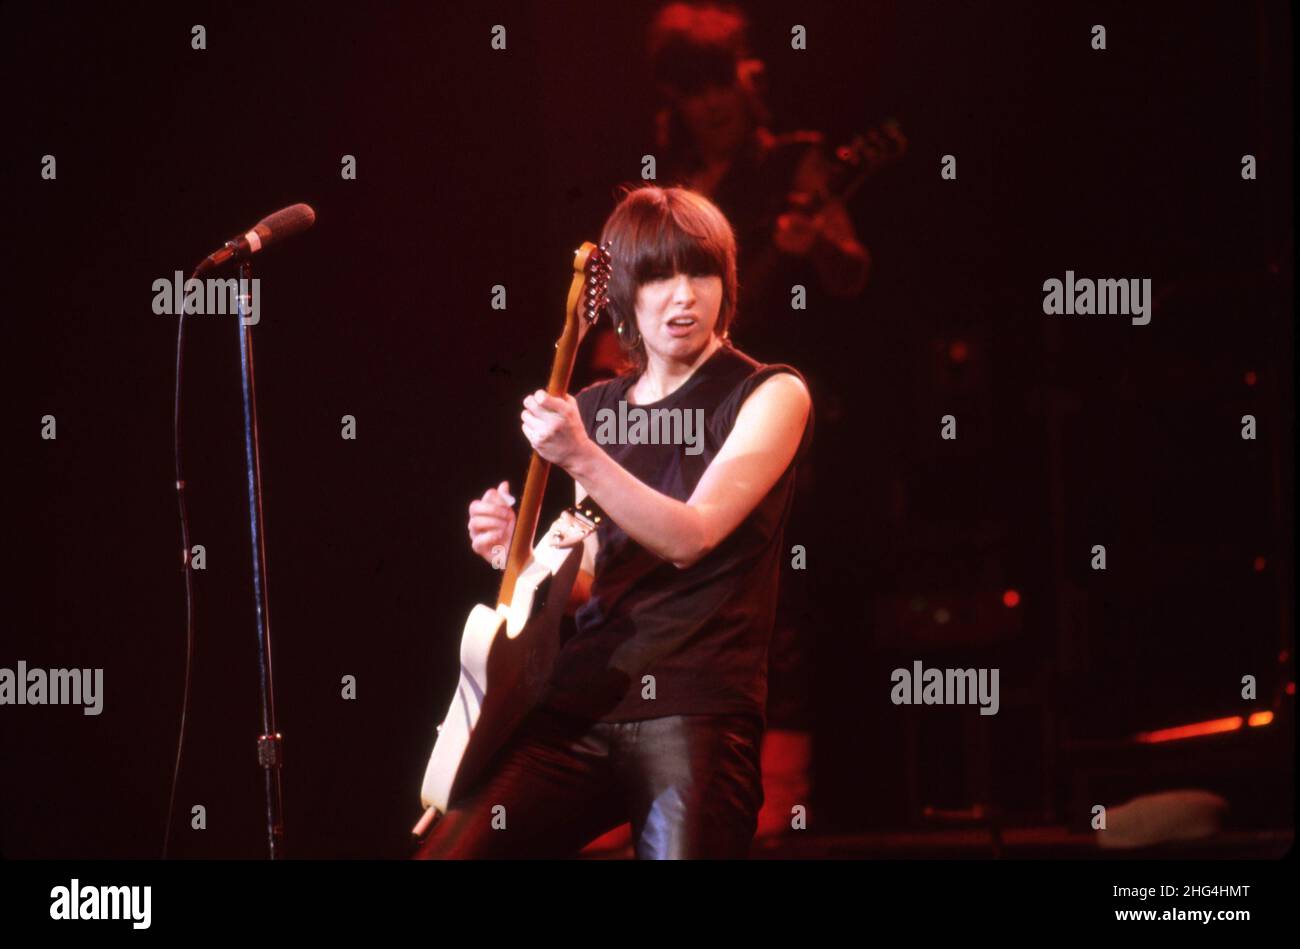 NEW YORK CITY - JANUARY 14: American guitarist, lead vocalist, and primary songwriter of the rock band The Pretenders, Chrissie Hynde performs at The Ritz in New York, NY, on January 14, 1982. Credit: Ross Marino / Rock Negatives / MediaPunch Stock Photo